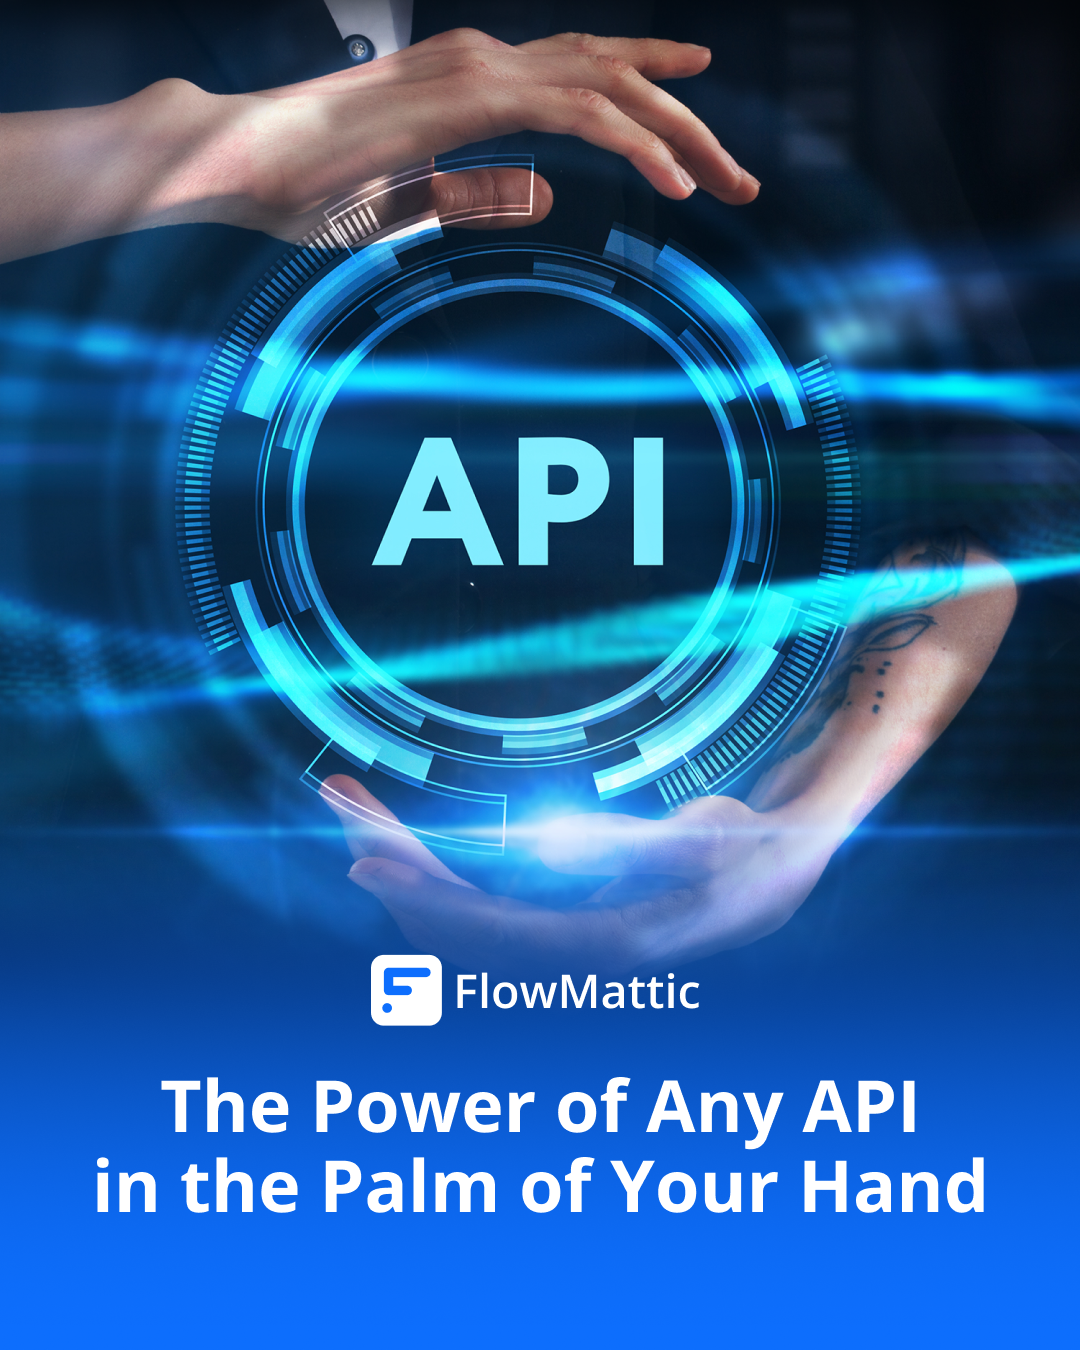 FlowMattic, The Power of Any API in the Palm of Your Hand